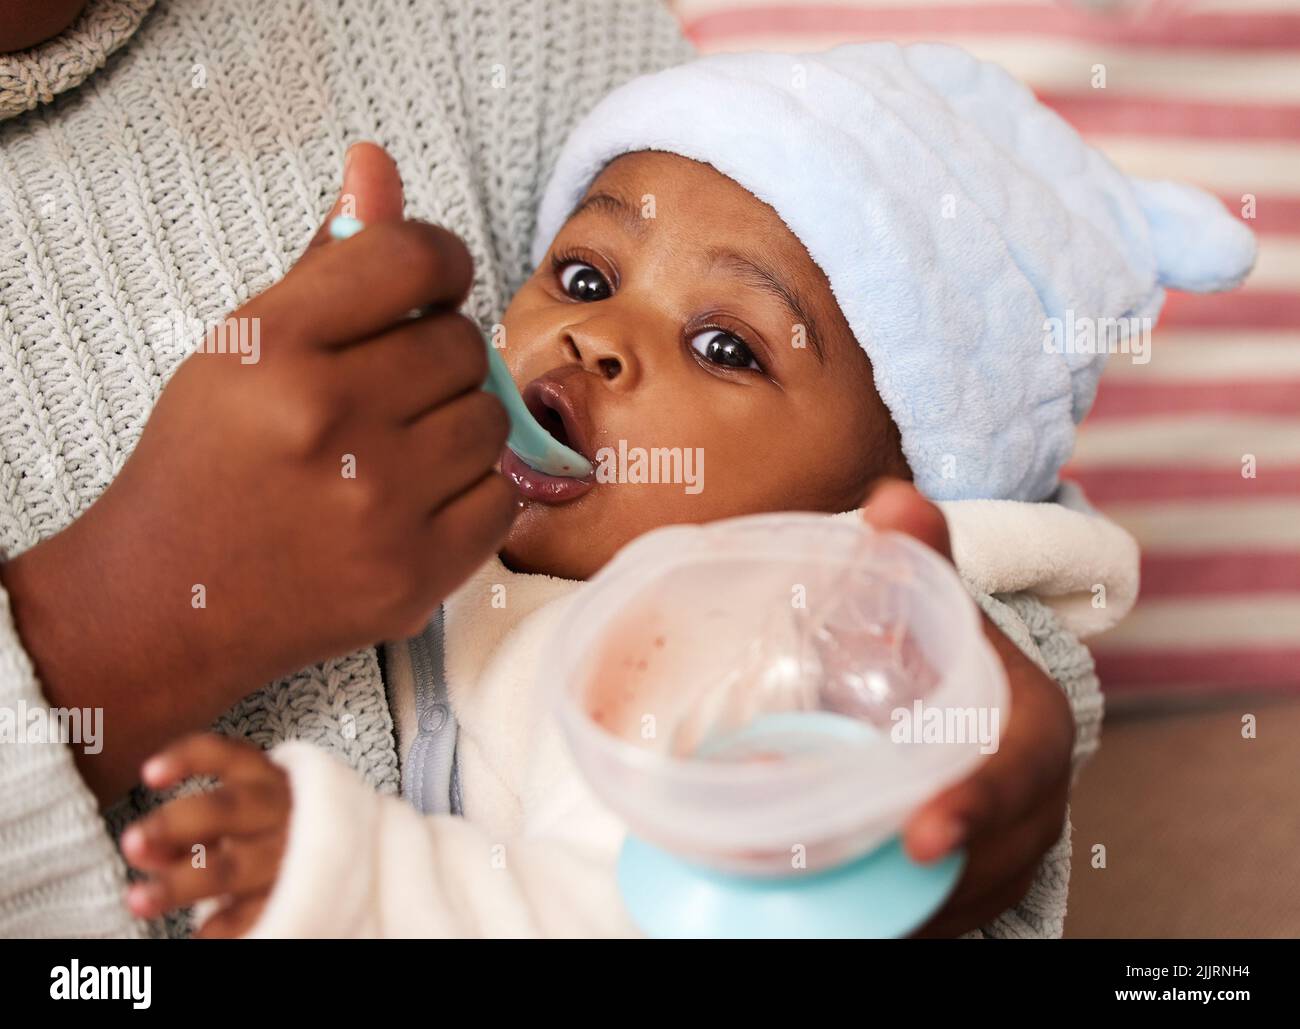 Tastes like more. an adorable baby girl being fed by her mother at home. Stock Photo